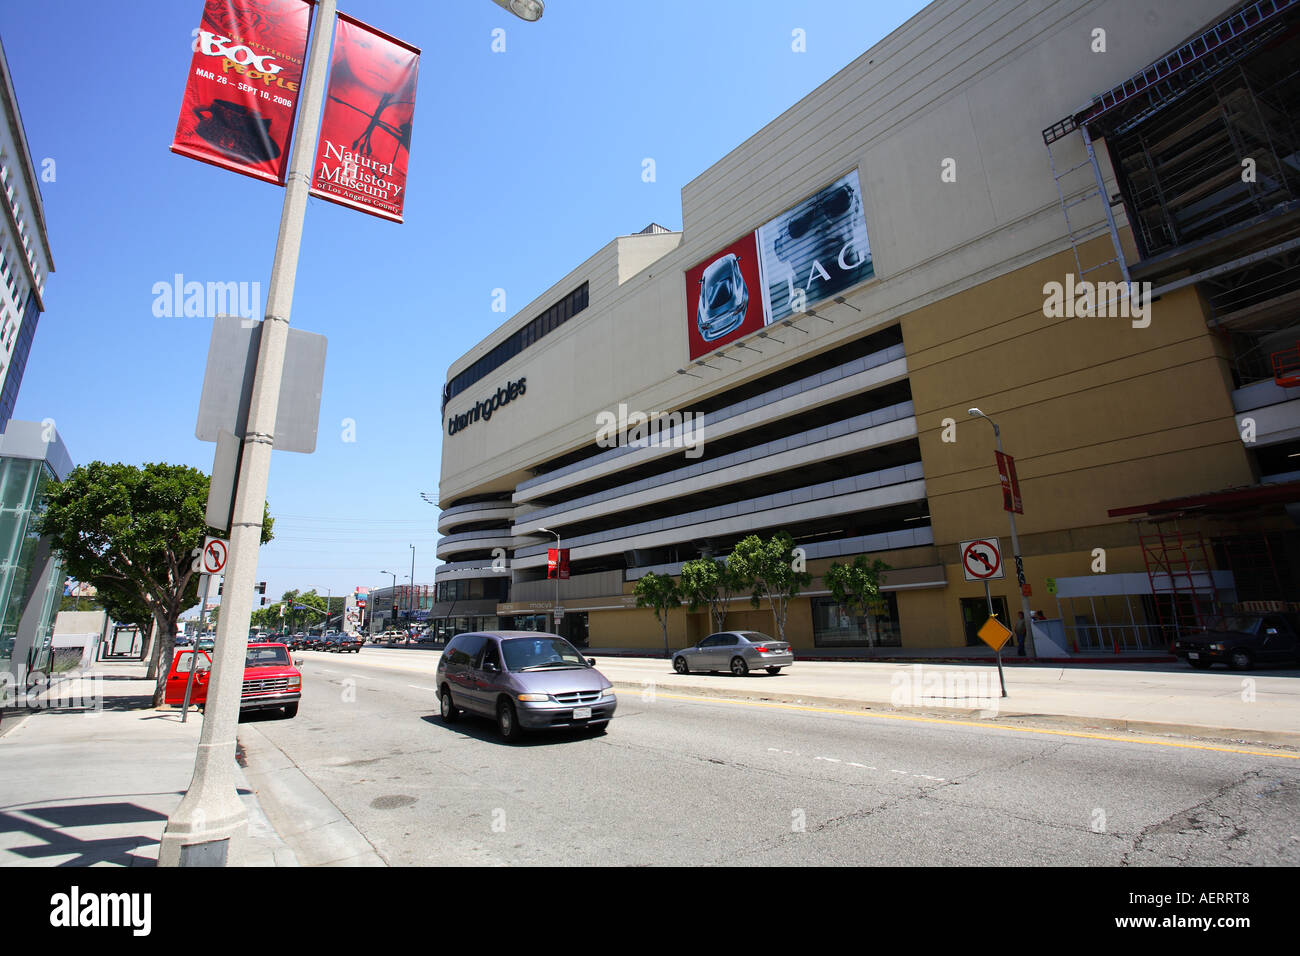 Beverly Center California Usa Map Stock Photo by